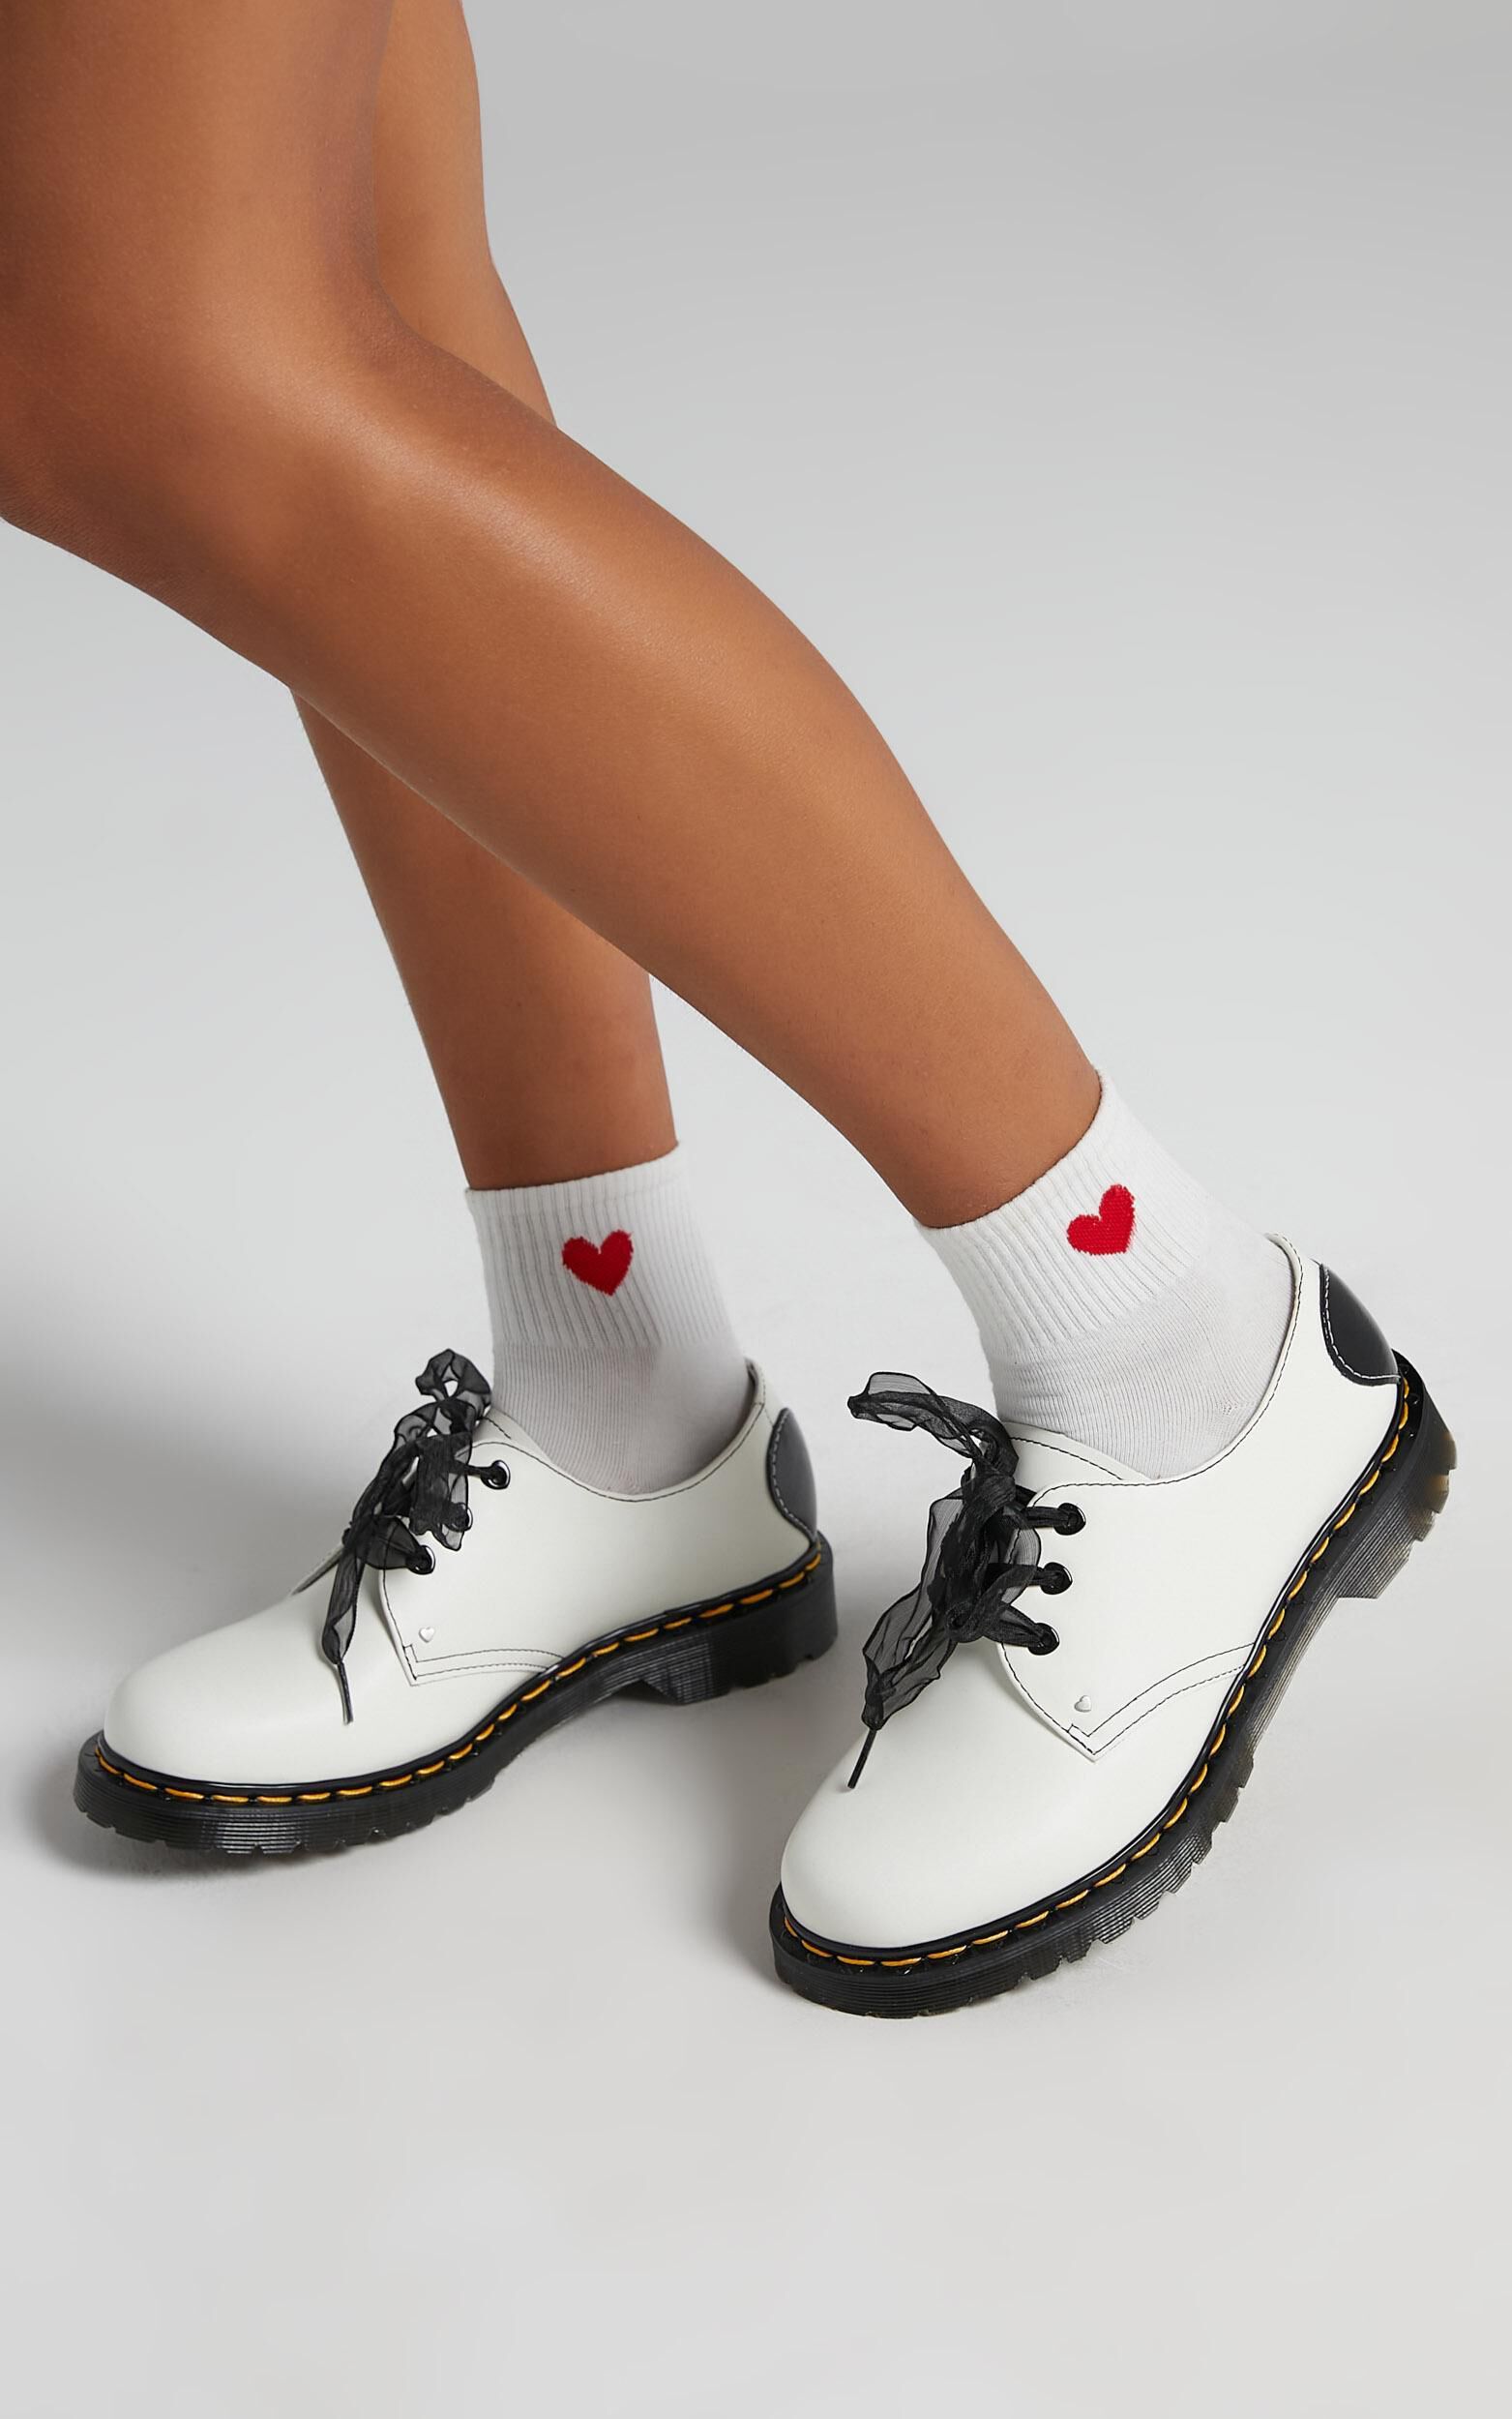 Dr. Martens - 1461 Hearts 3 Eye Shoe in White Smooth & Black